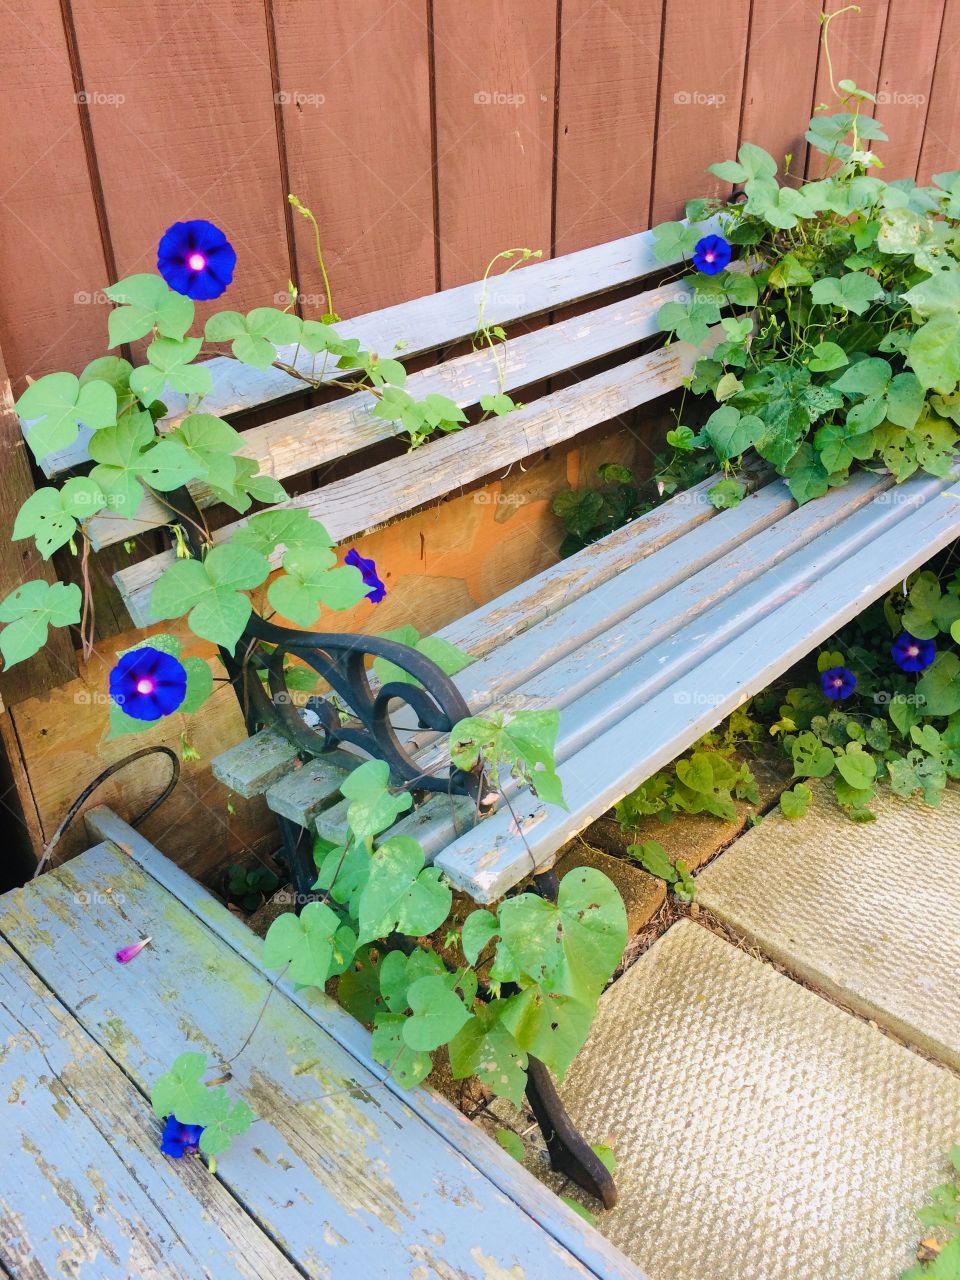 Blue park bench with morning glory growing on it